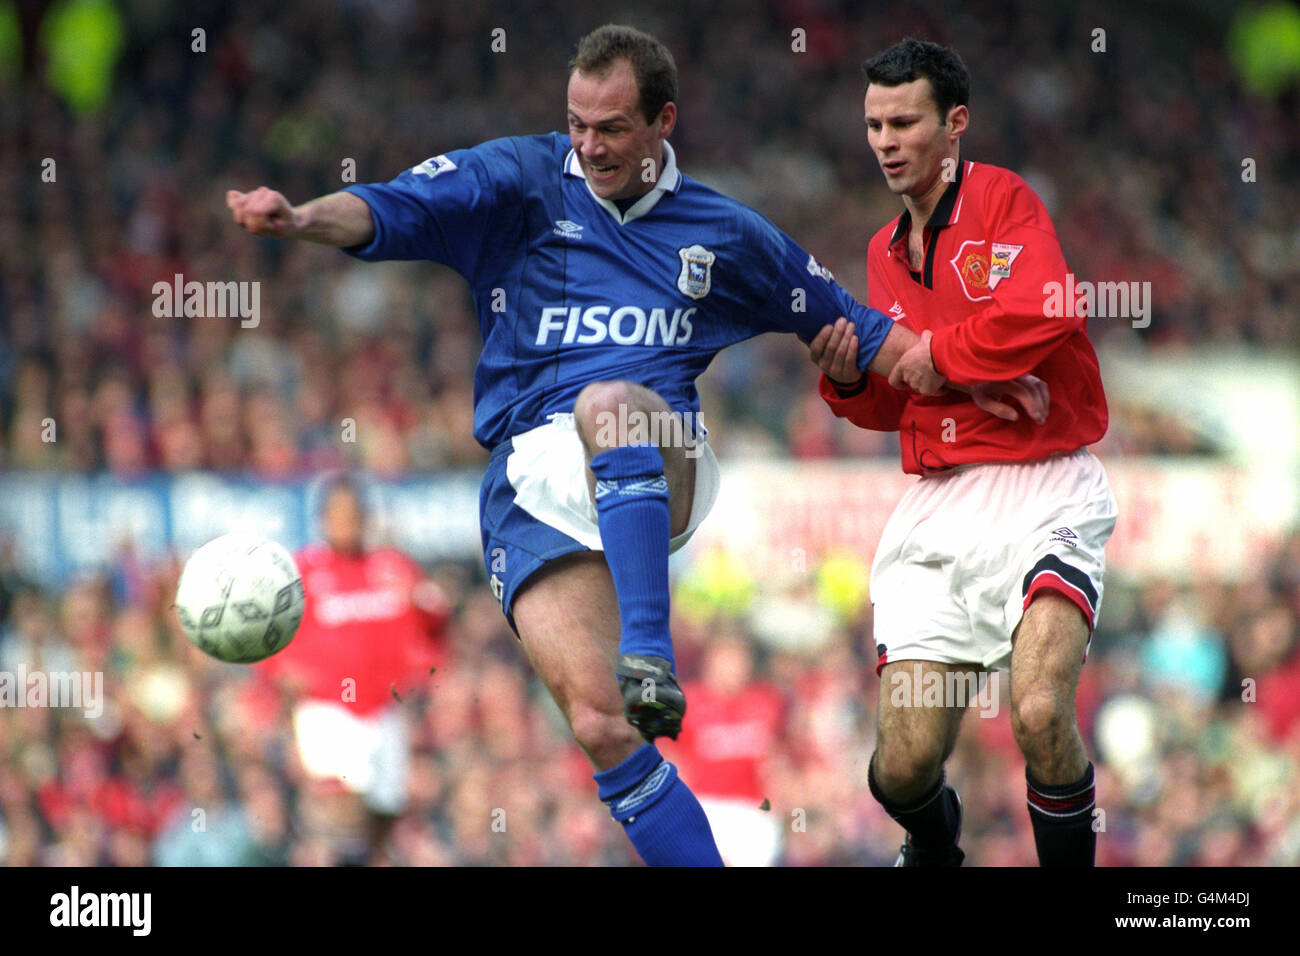 Soccer - FA Carling Premiership - Manchester United v Ipswich Town - Old Trafford. Ryan Giggs, Manchester United. Stock Photo